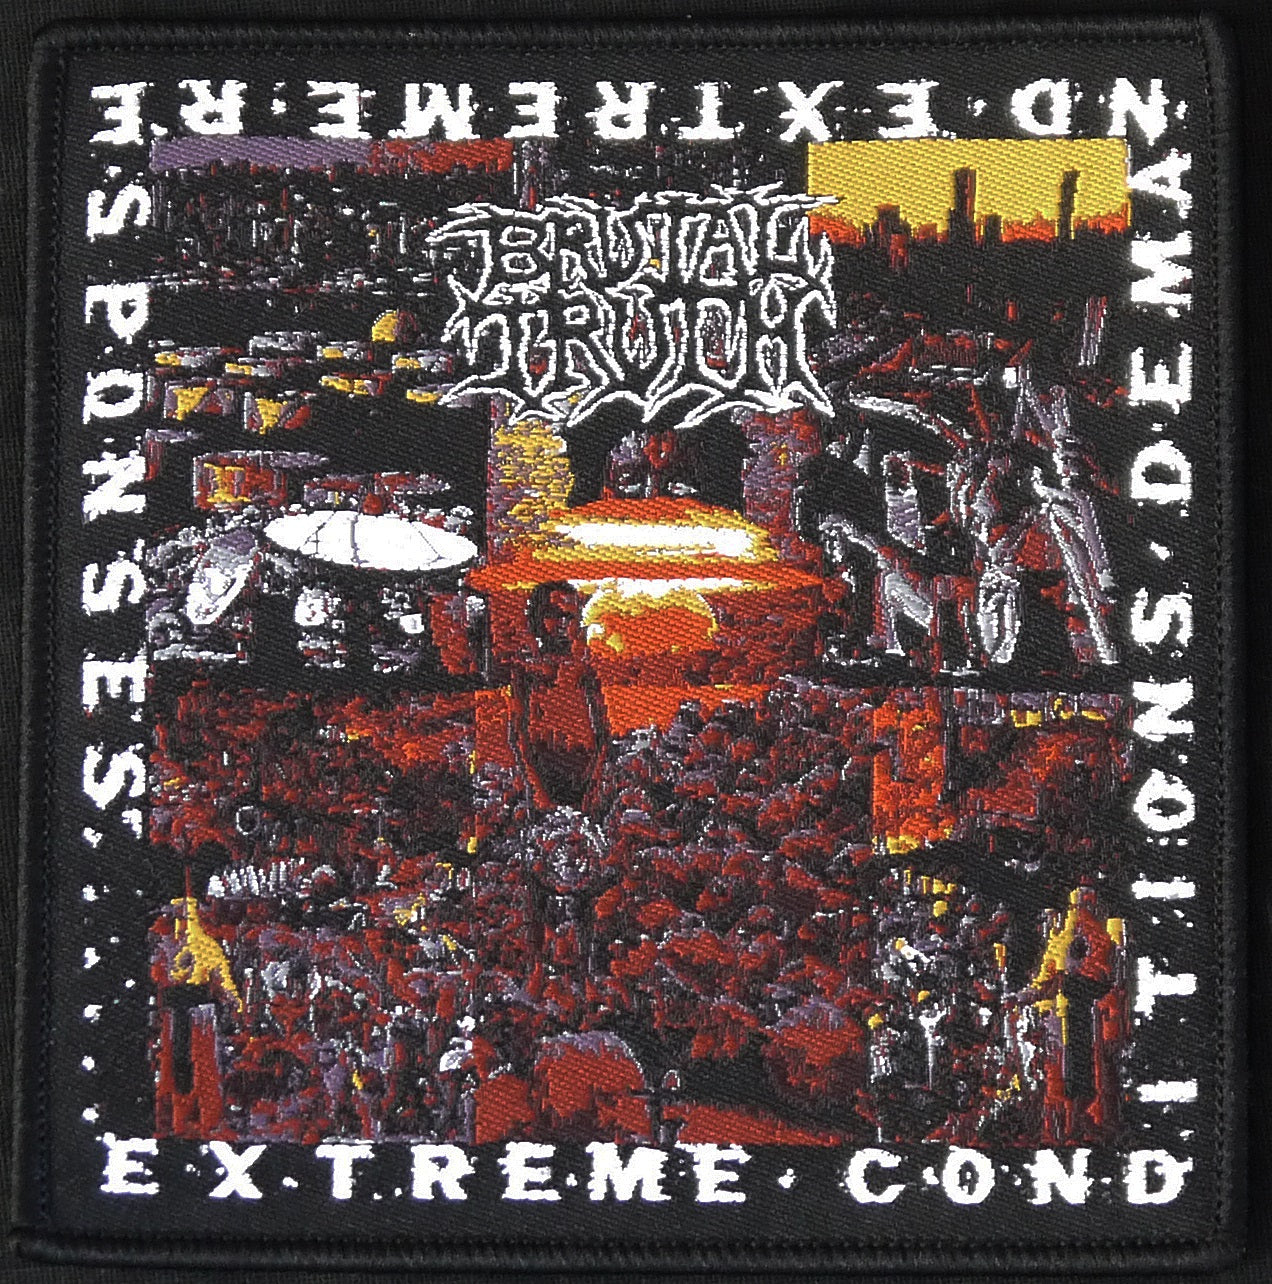 BRUTAL TRUTH - Extreme Conditions Demand Extreme Responses Woven Patch